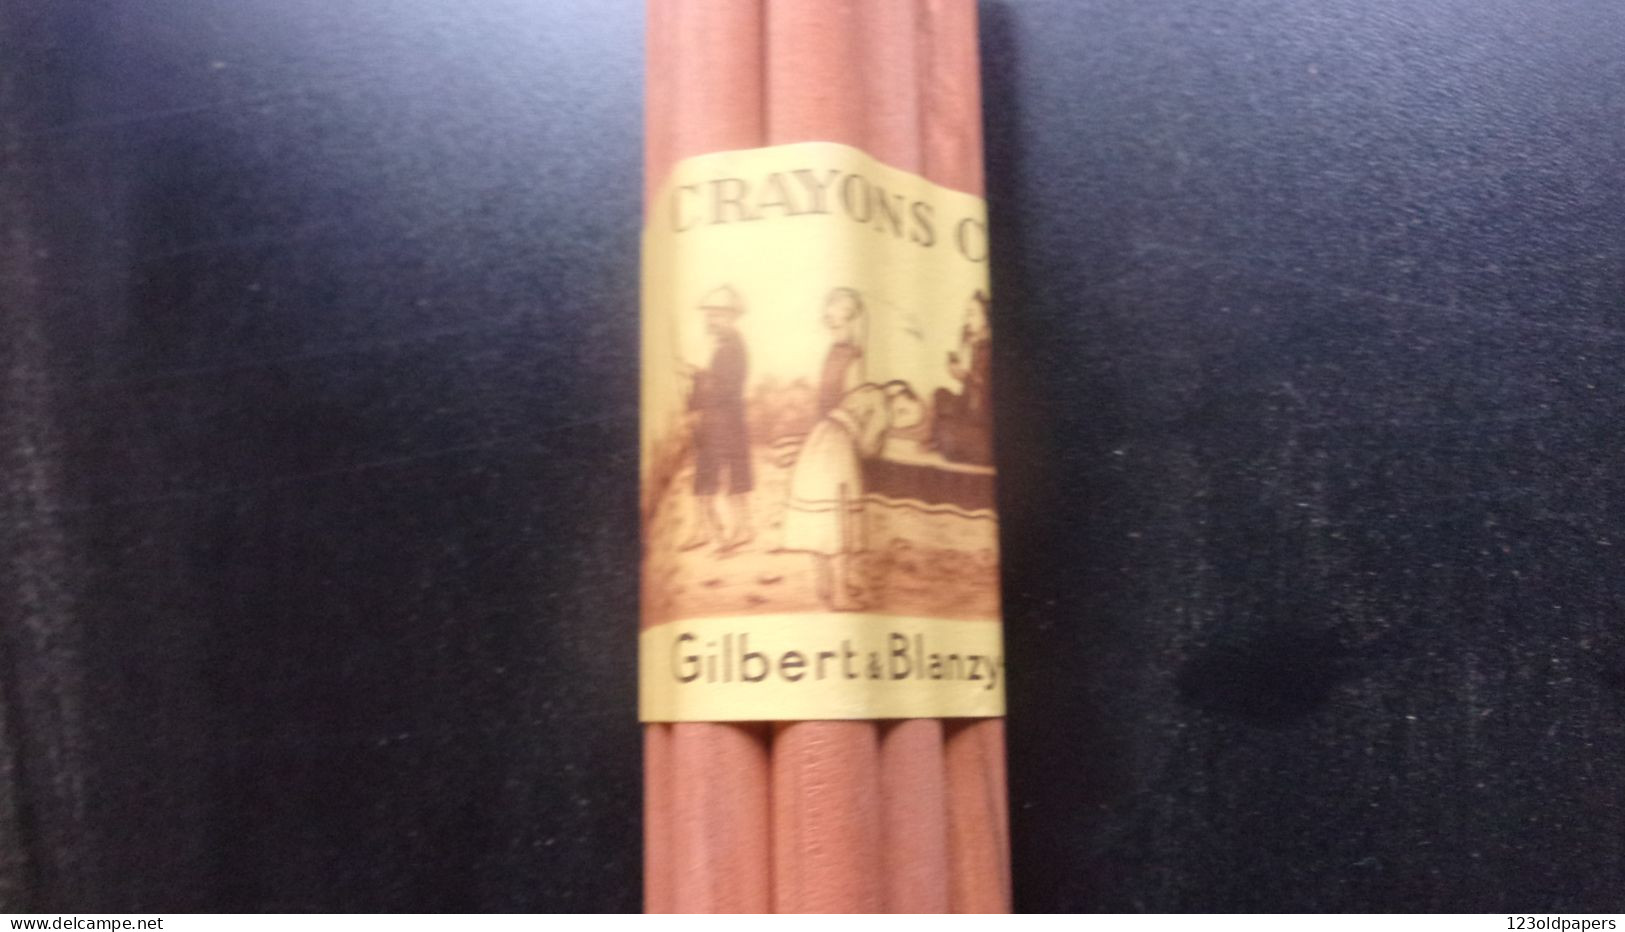 ️ RARE COMME NEUF   GILBERT BLANZY POURE CRAYONS CHINOIS ENSEMBLE NON OUVERT 12 CRAYONS N°2 - Lapiceros